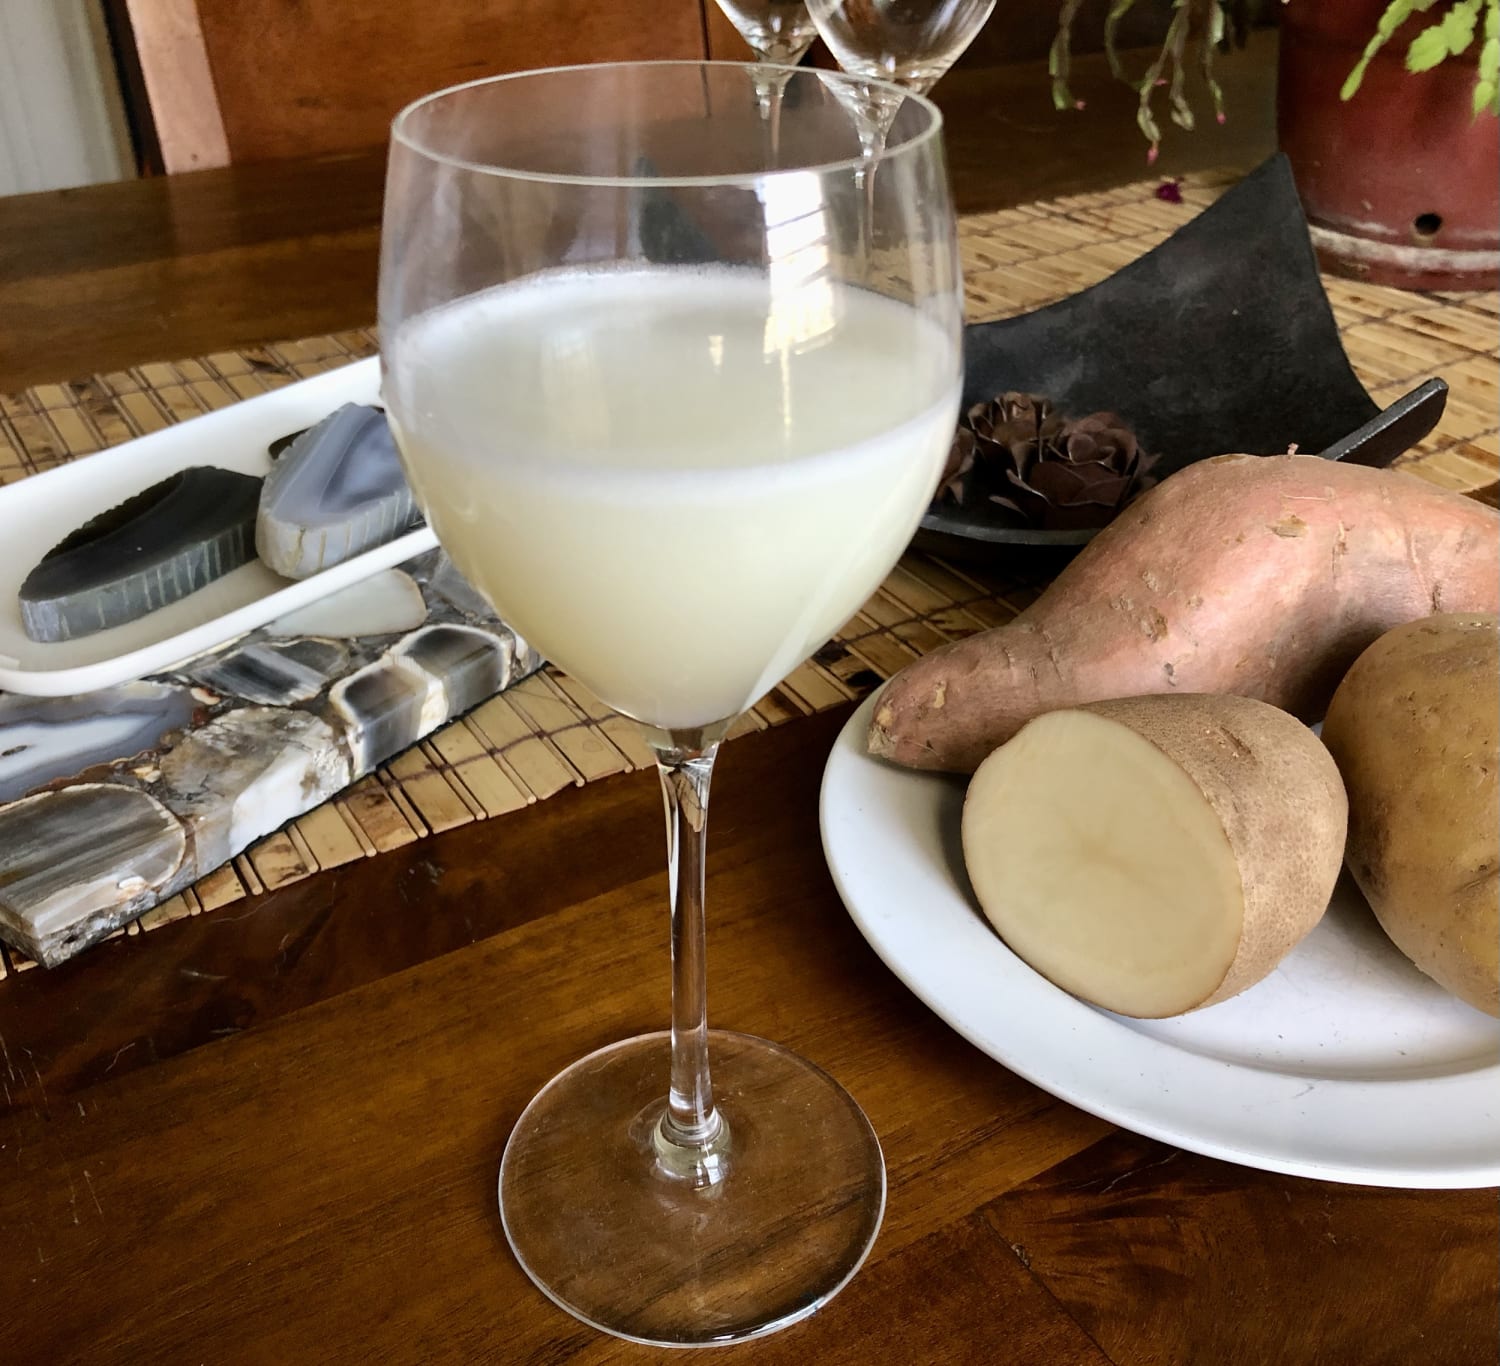 What Is Potato Milk? Here's How to Make Your Own